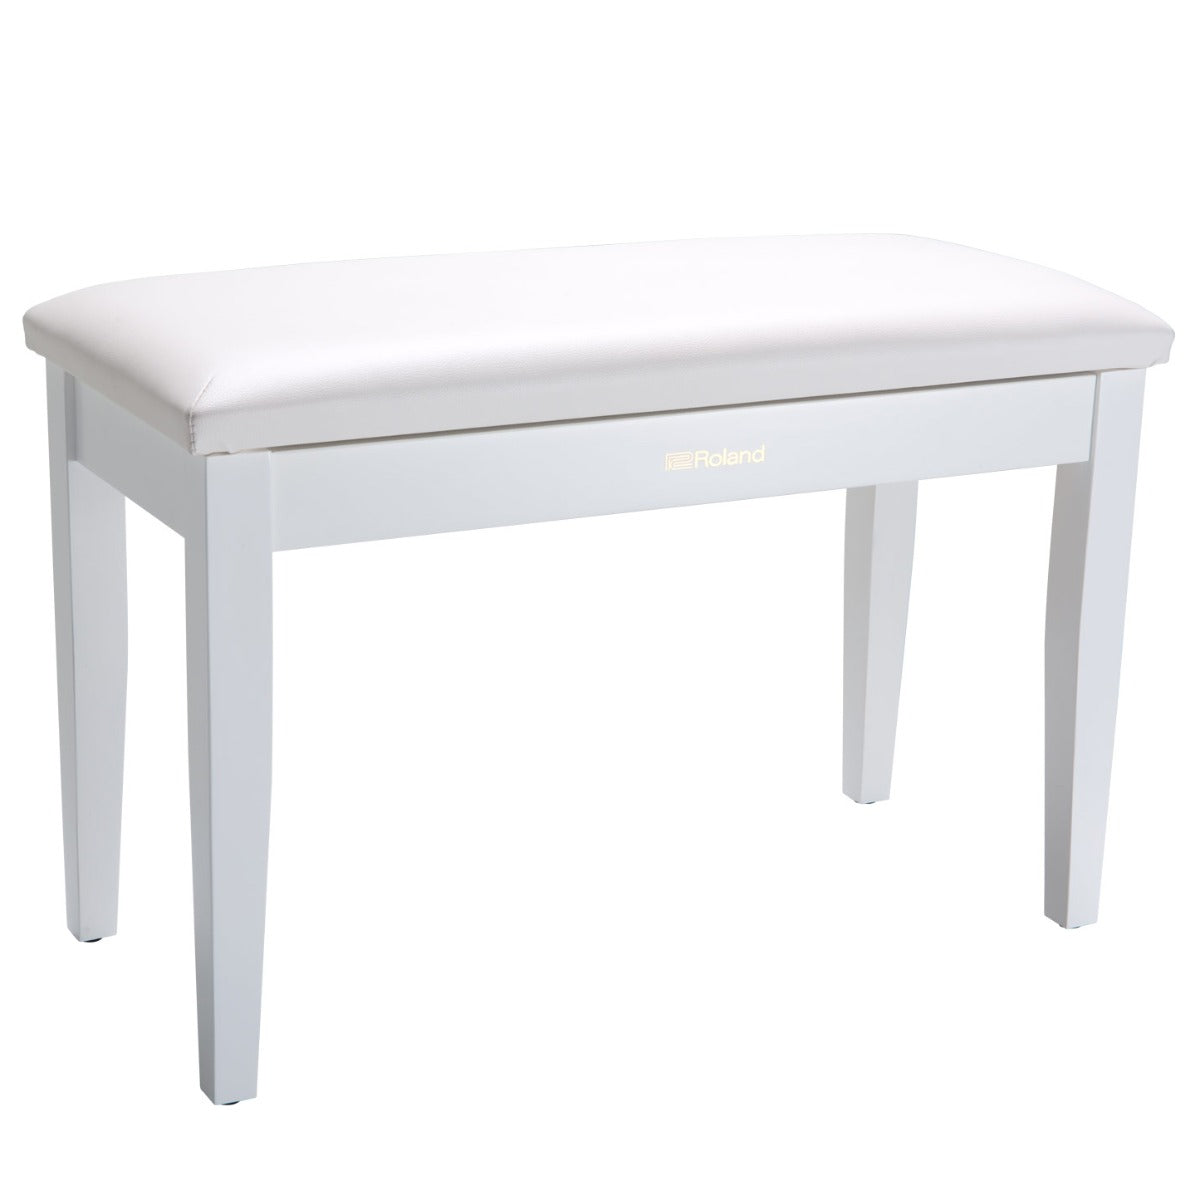 Roland RPB-D100WH Duet Piano Bench with Storage - Satin White